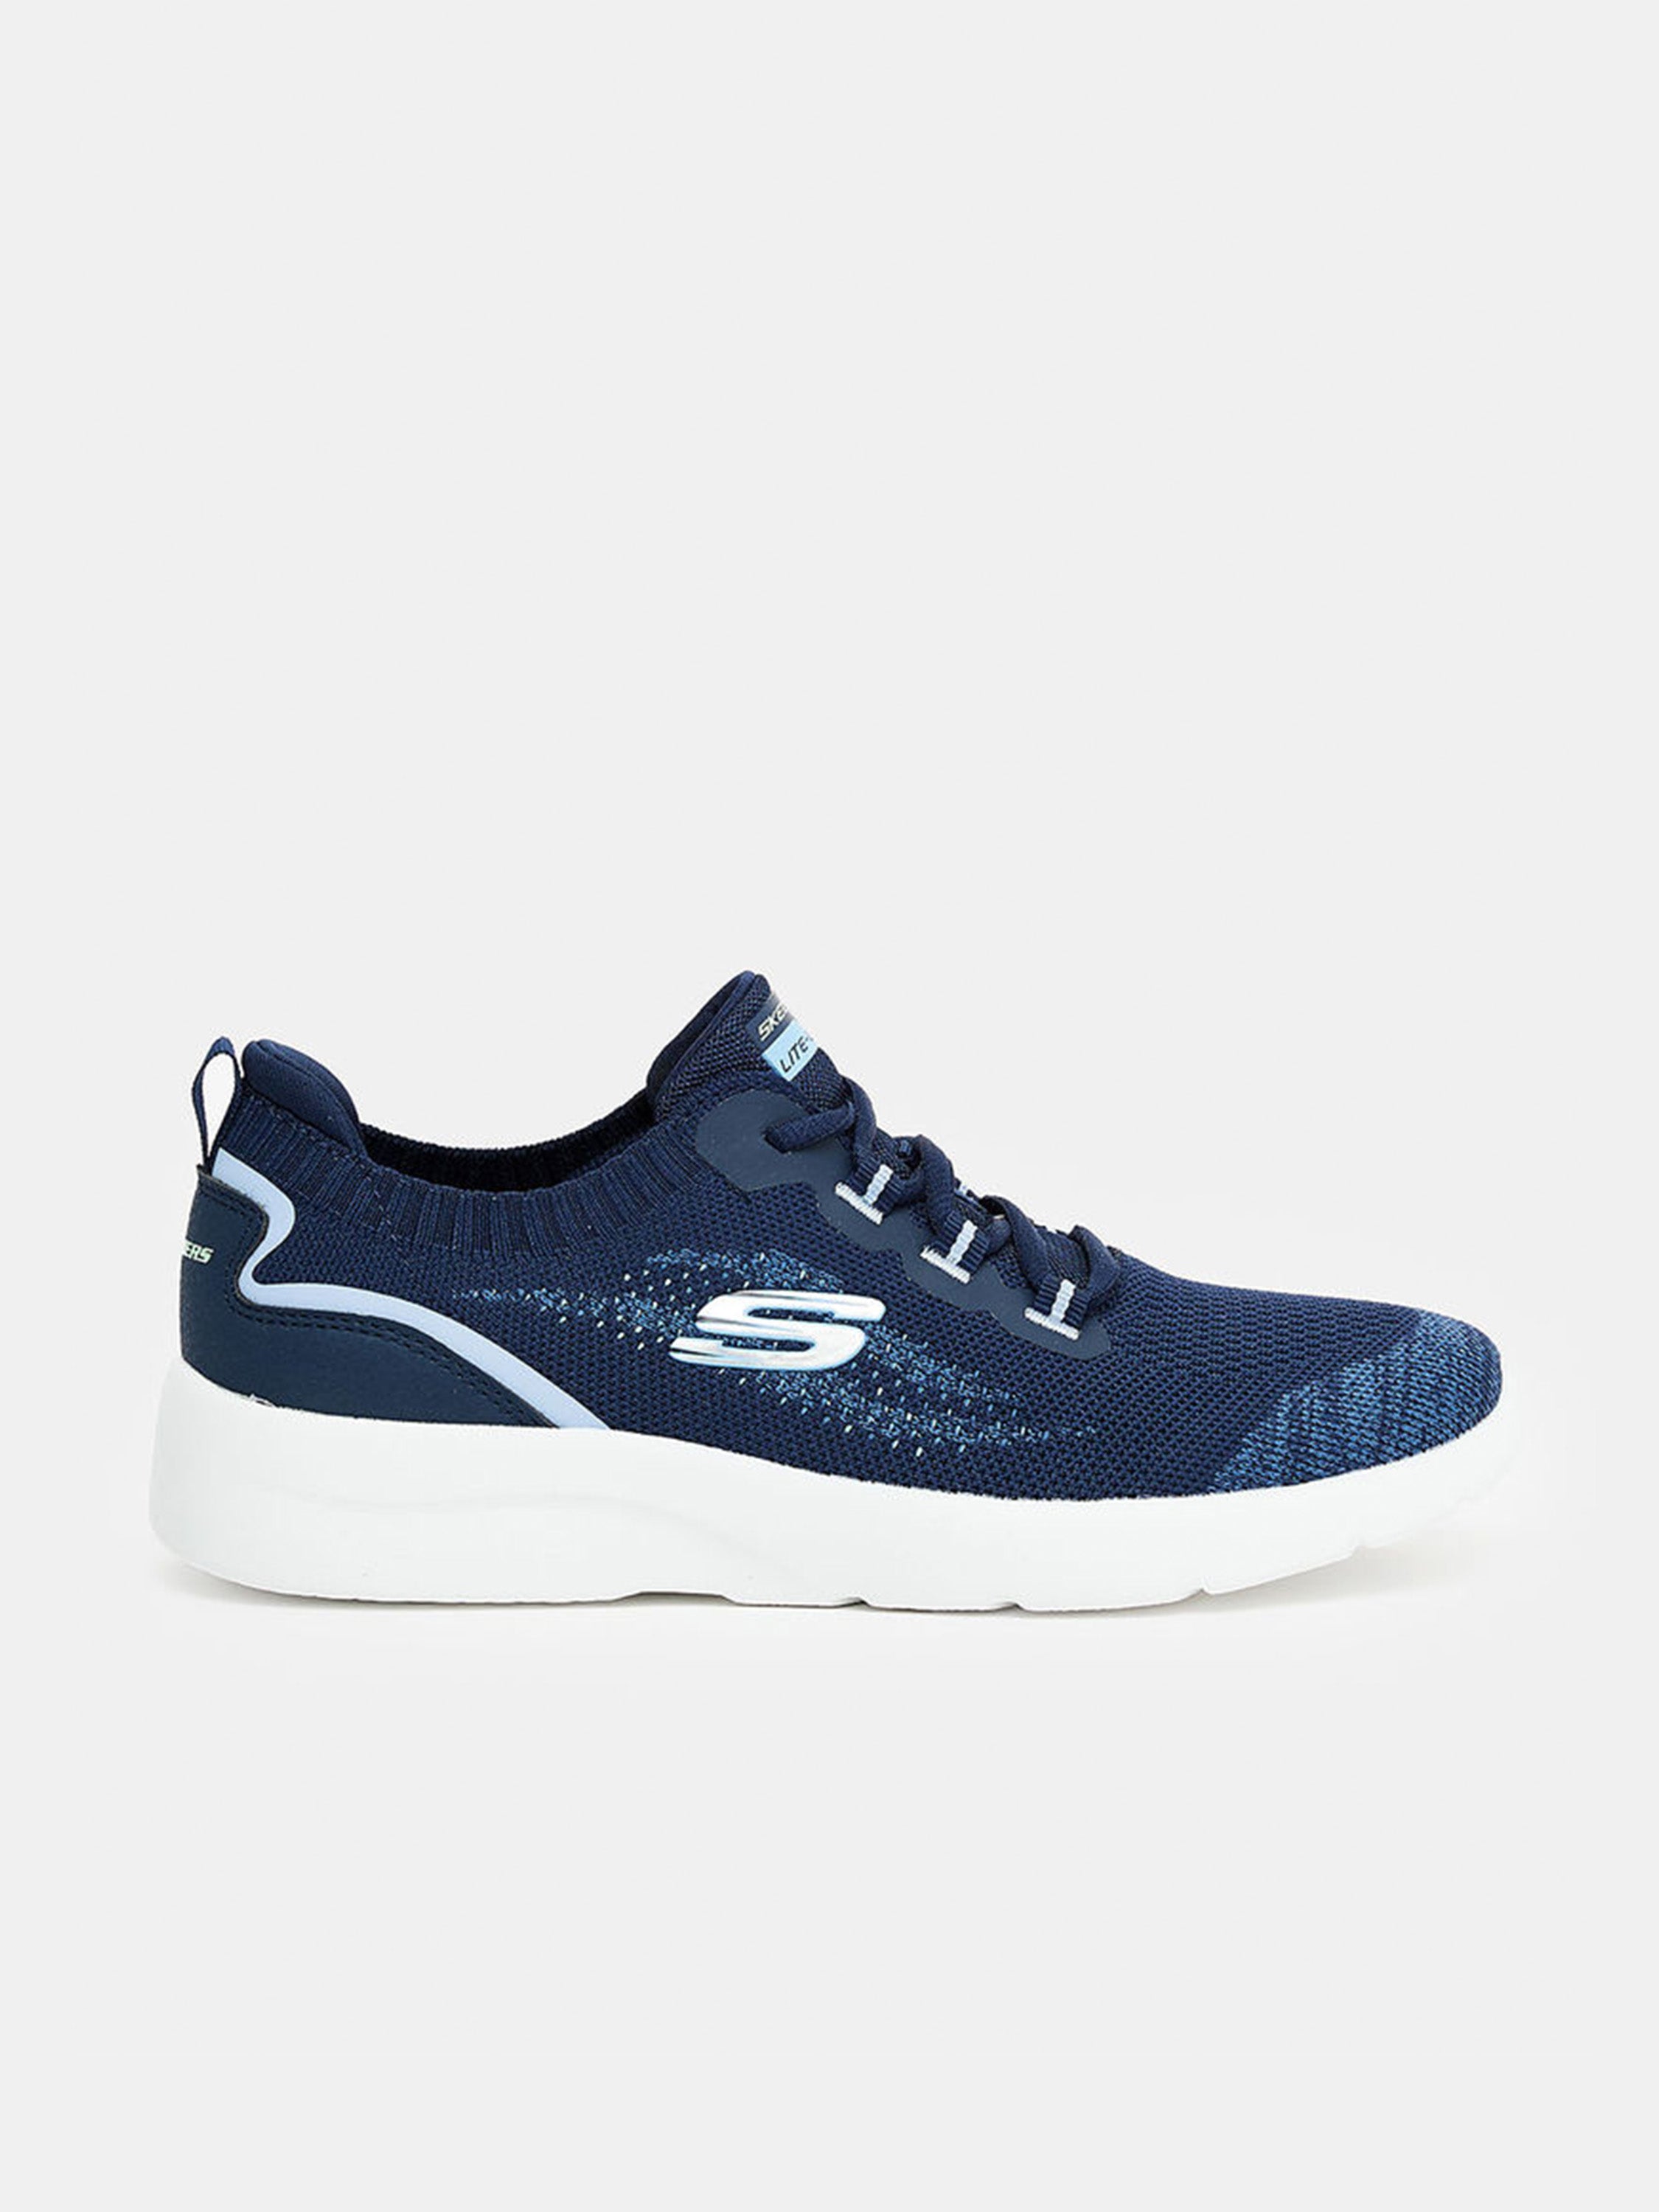 Skechers Women's Dynamight 2.0 Trainers #color_Navy